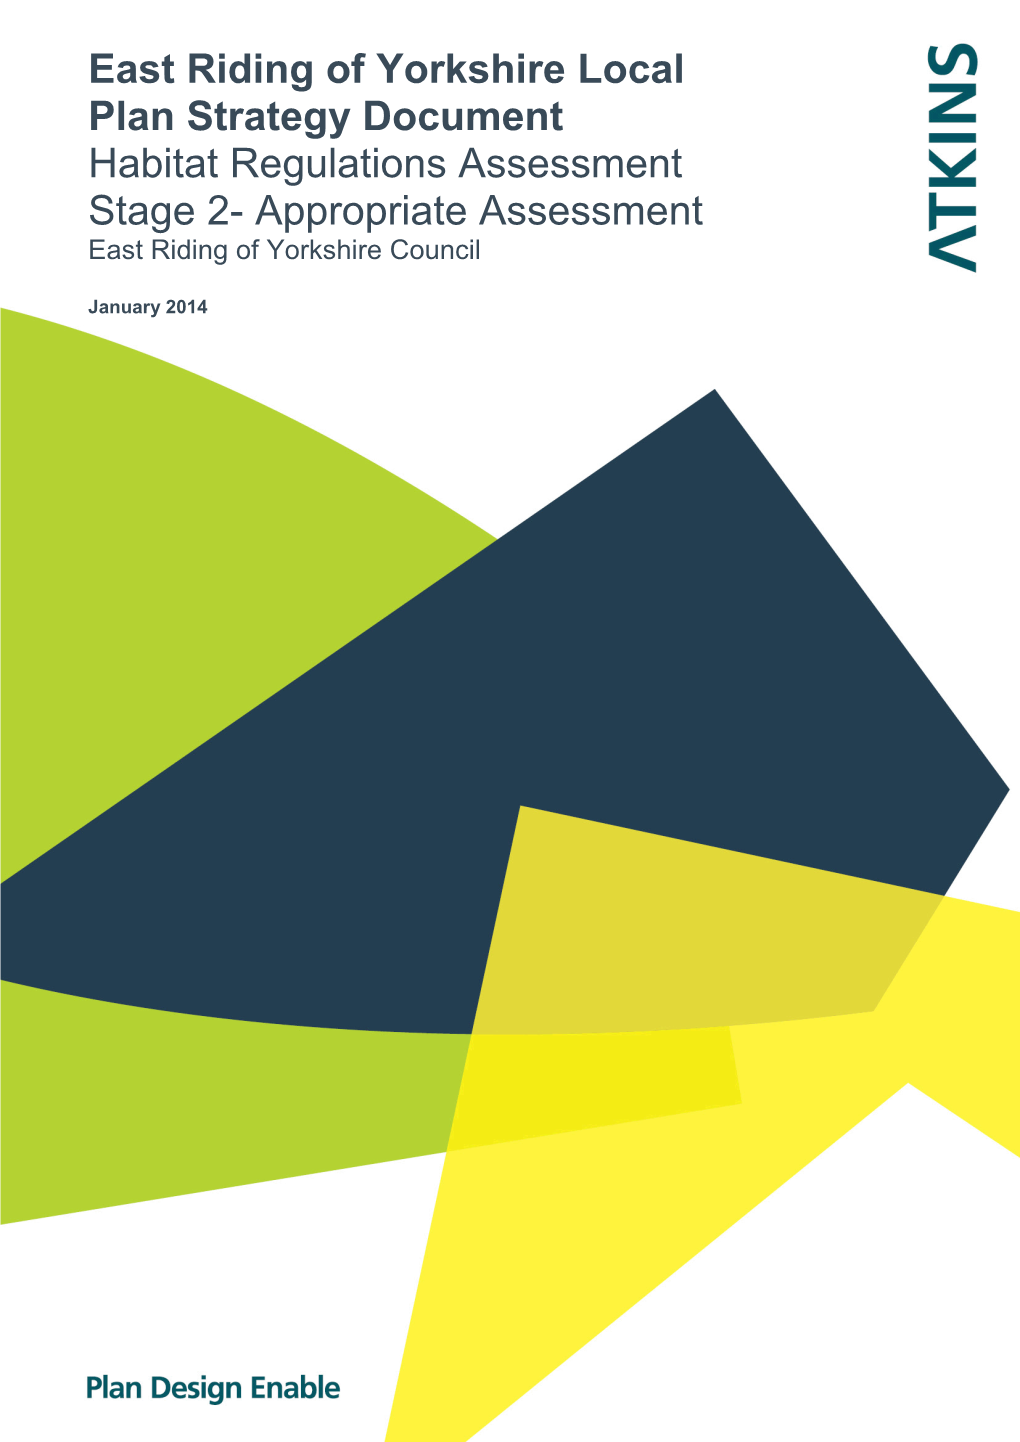 East Riding of Yorkshire Local Plan Strategy Document Habitat Regulations Assessment Stage 2- Appropriate Assessment East Riding of Yorkshire Council